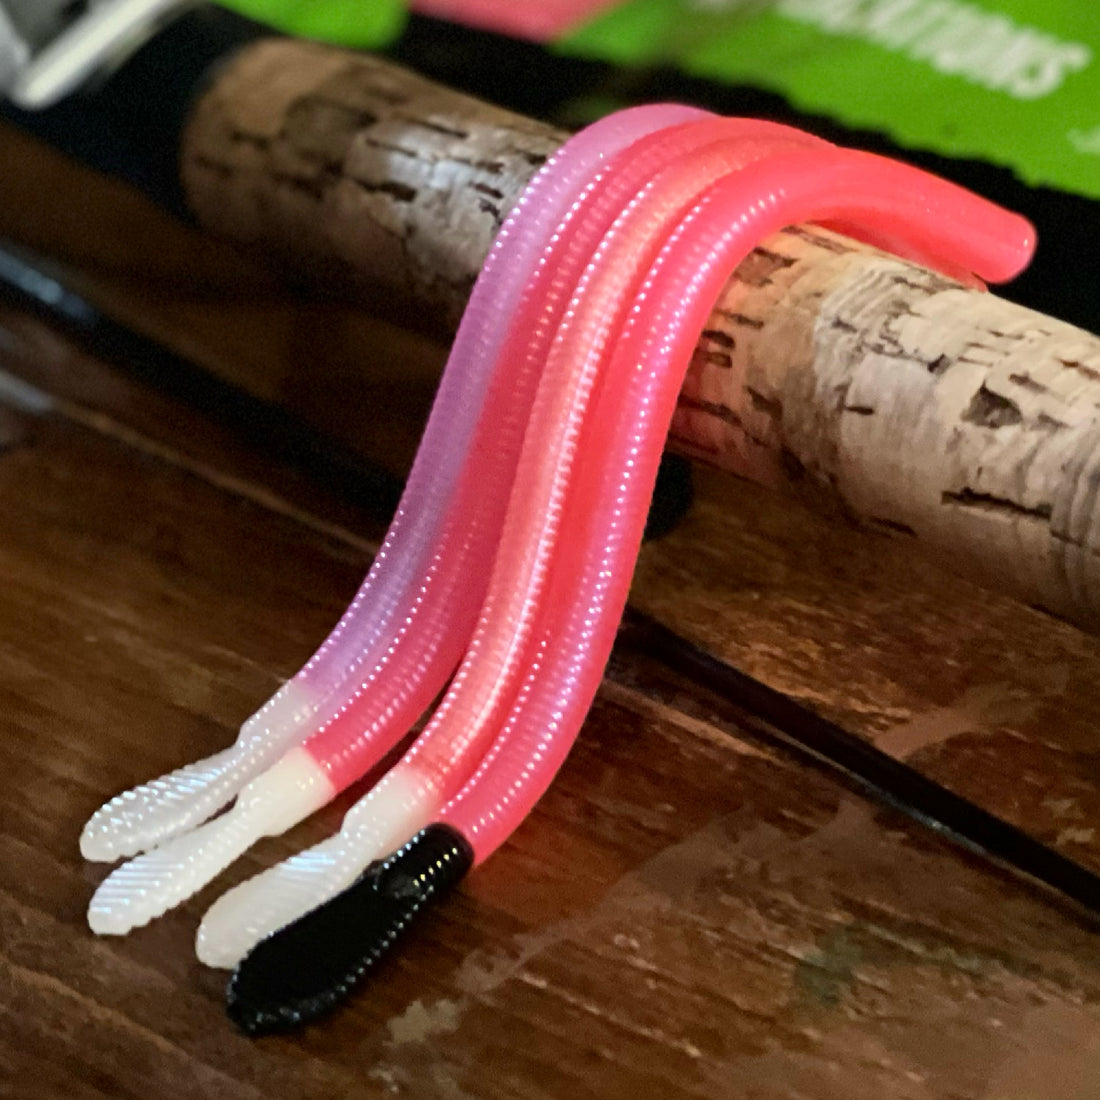 "Red Worms" for Steelhead by Lucas H.